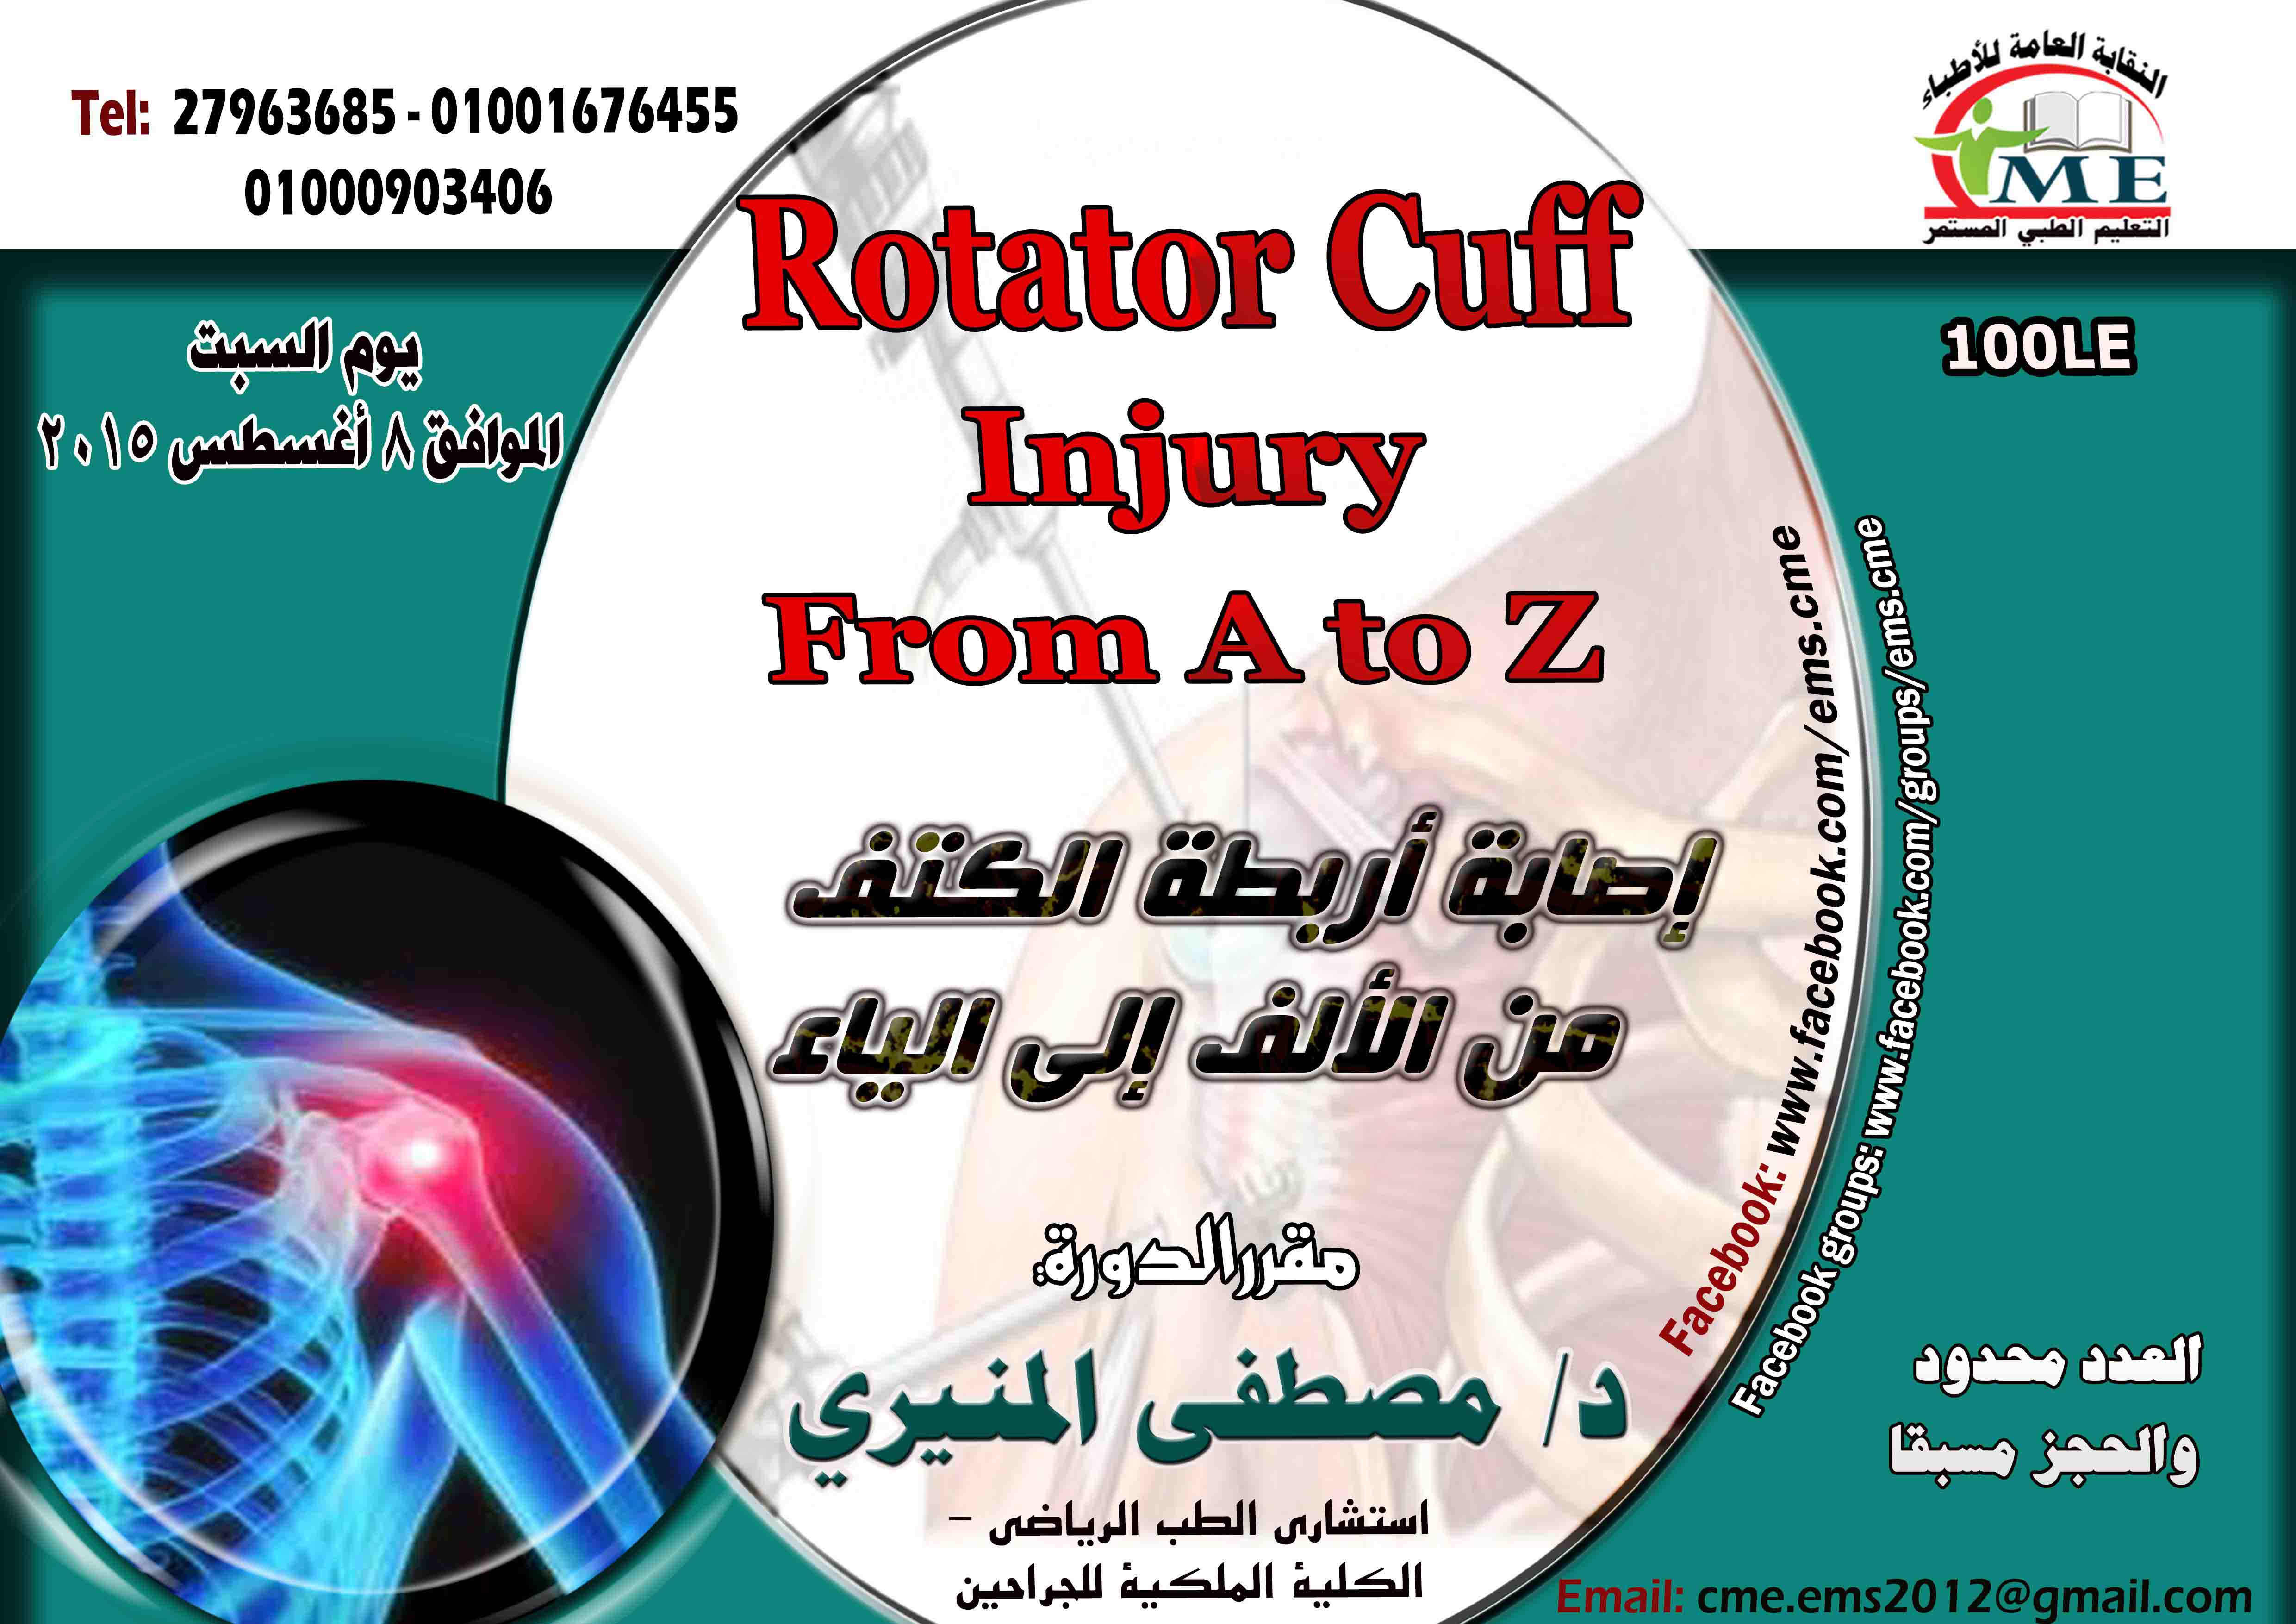 Rotator Cuff Injury From A to Z